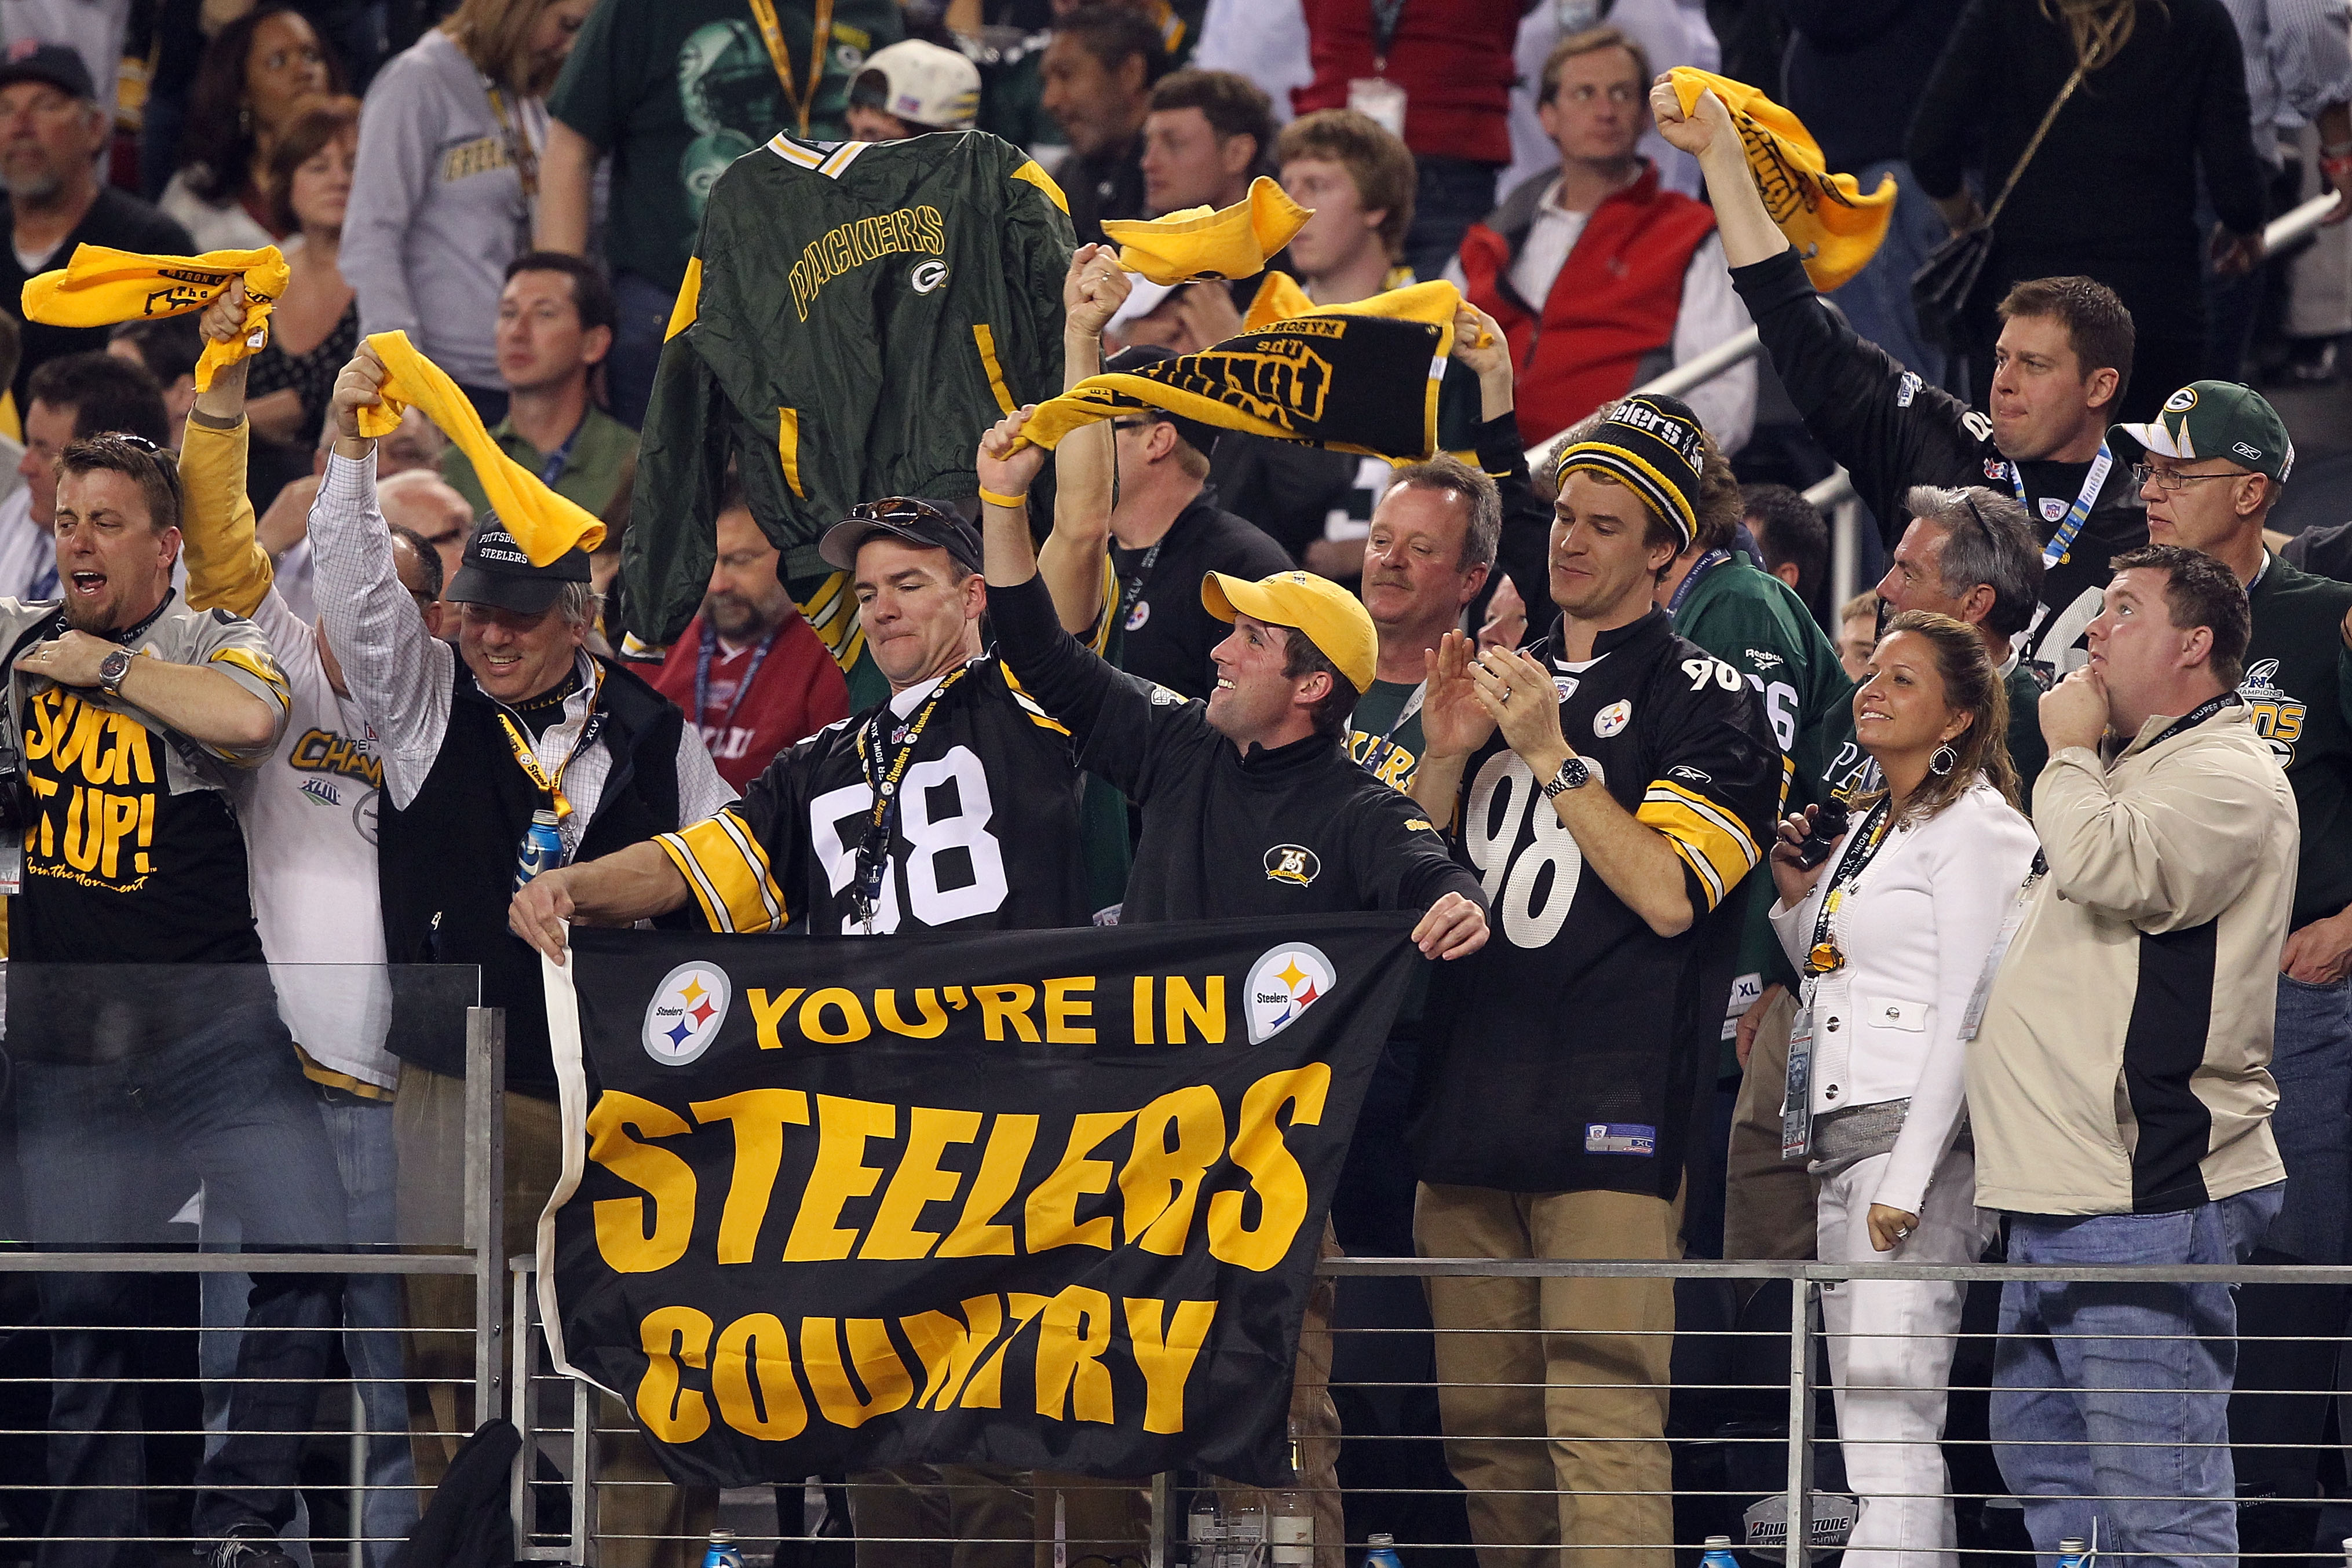 What NFL team has the wildest fans?